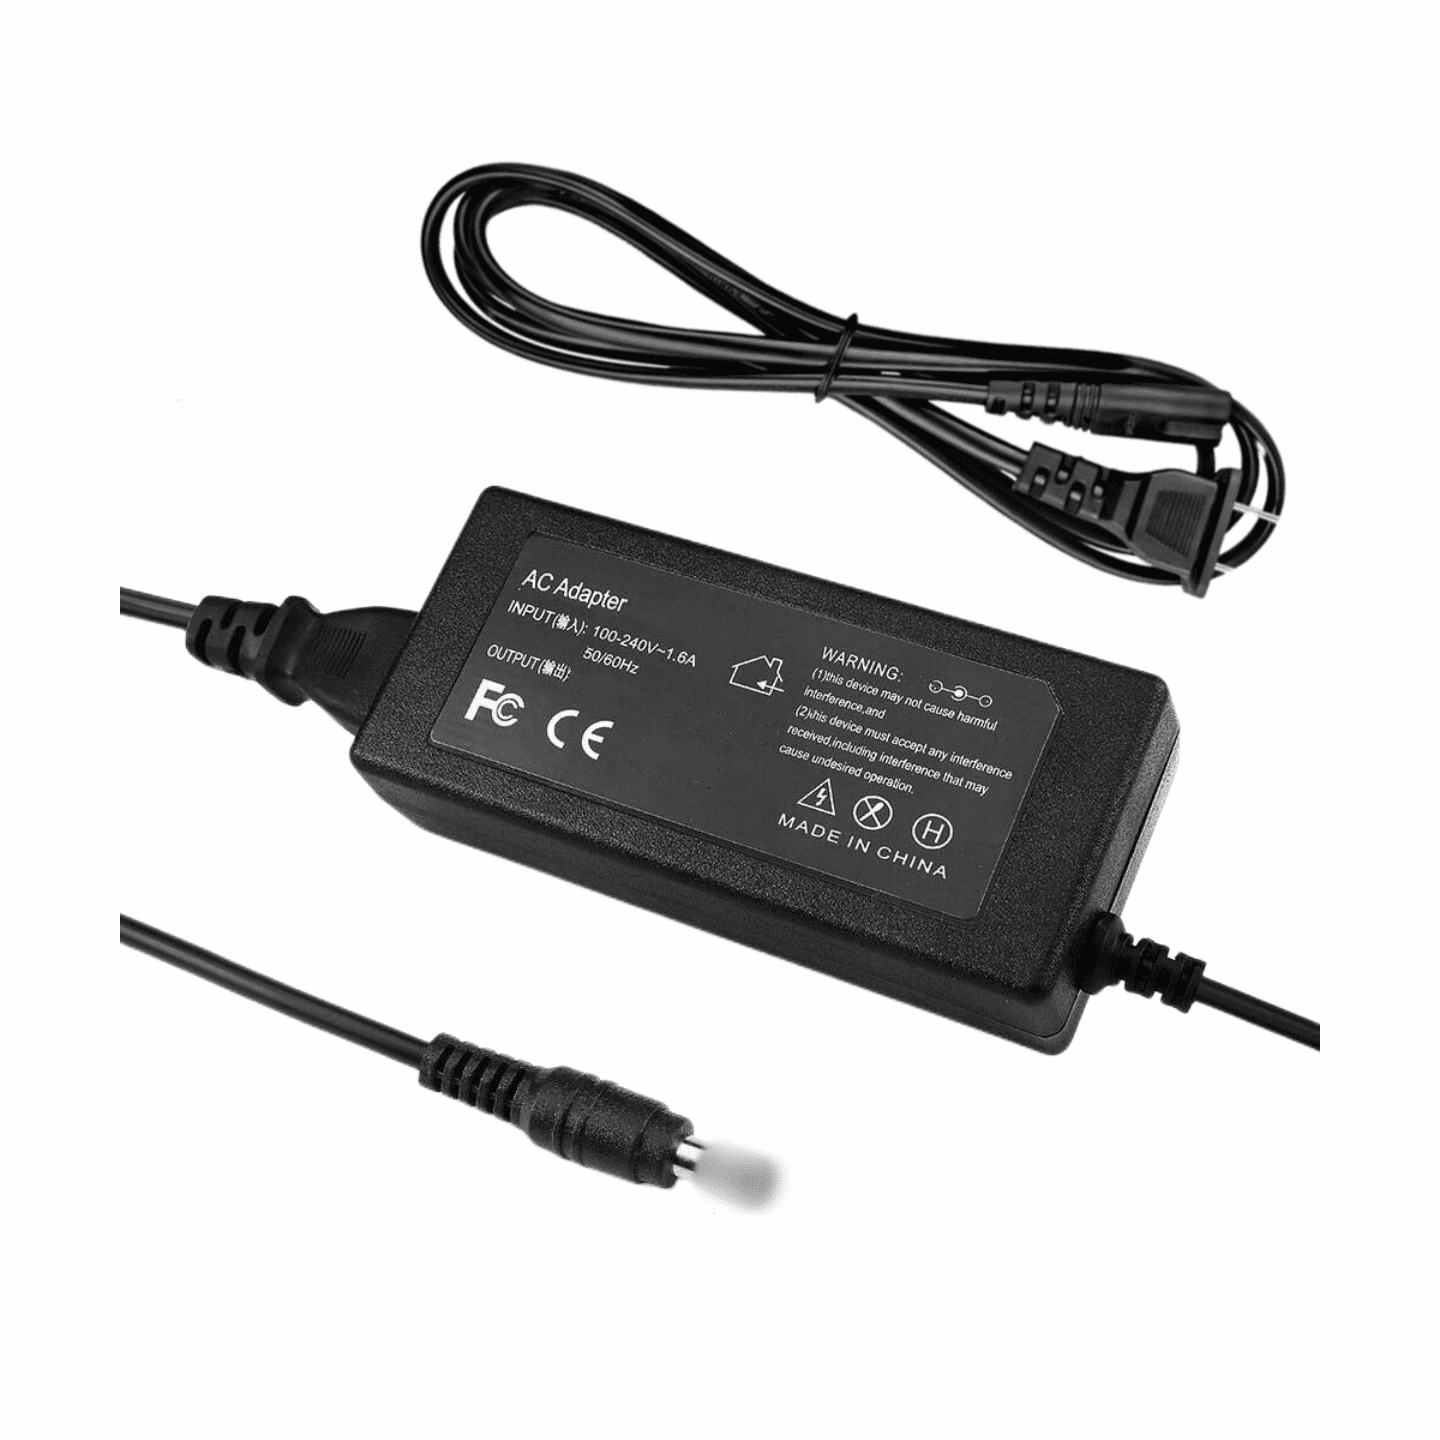 KIRCUIT 65W AC Adapter Replacement for HP N193 V85 R33030 Laptop Battery Charger  Power Supply Cord 